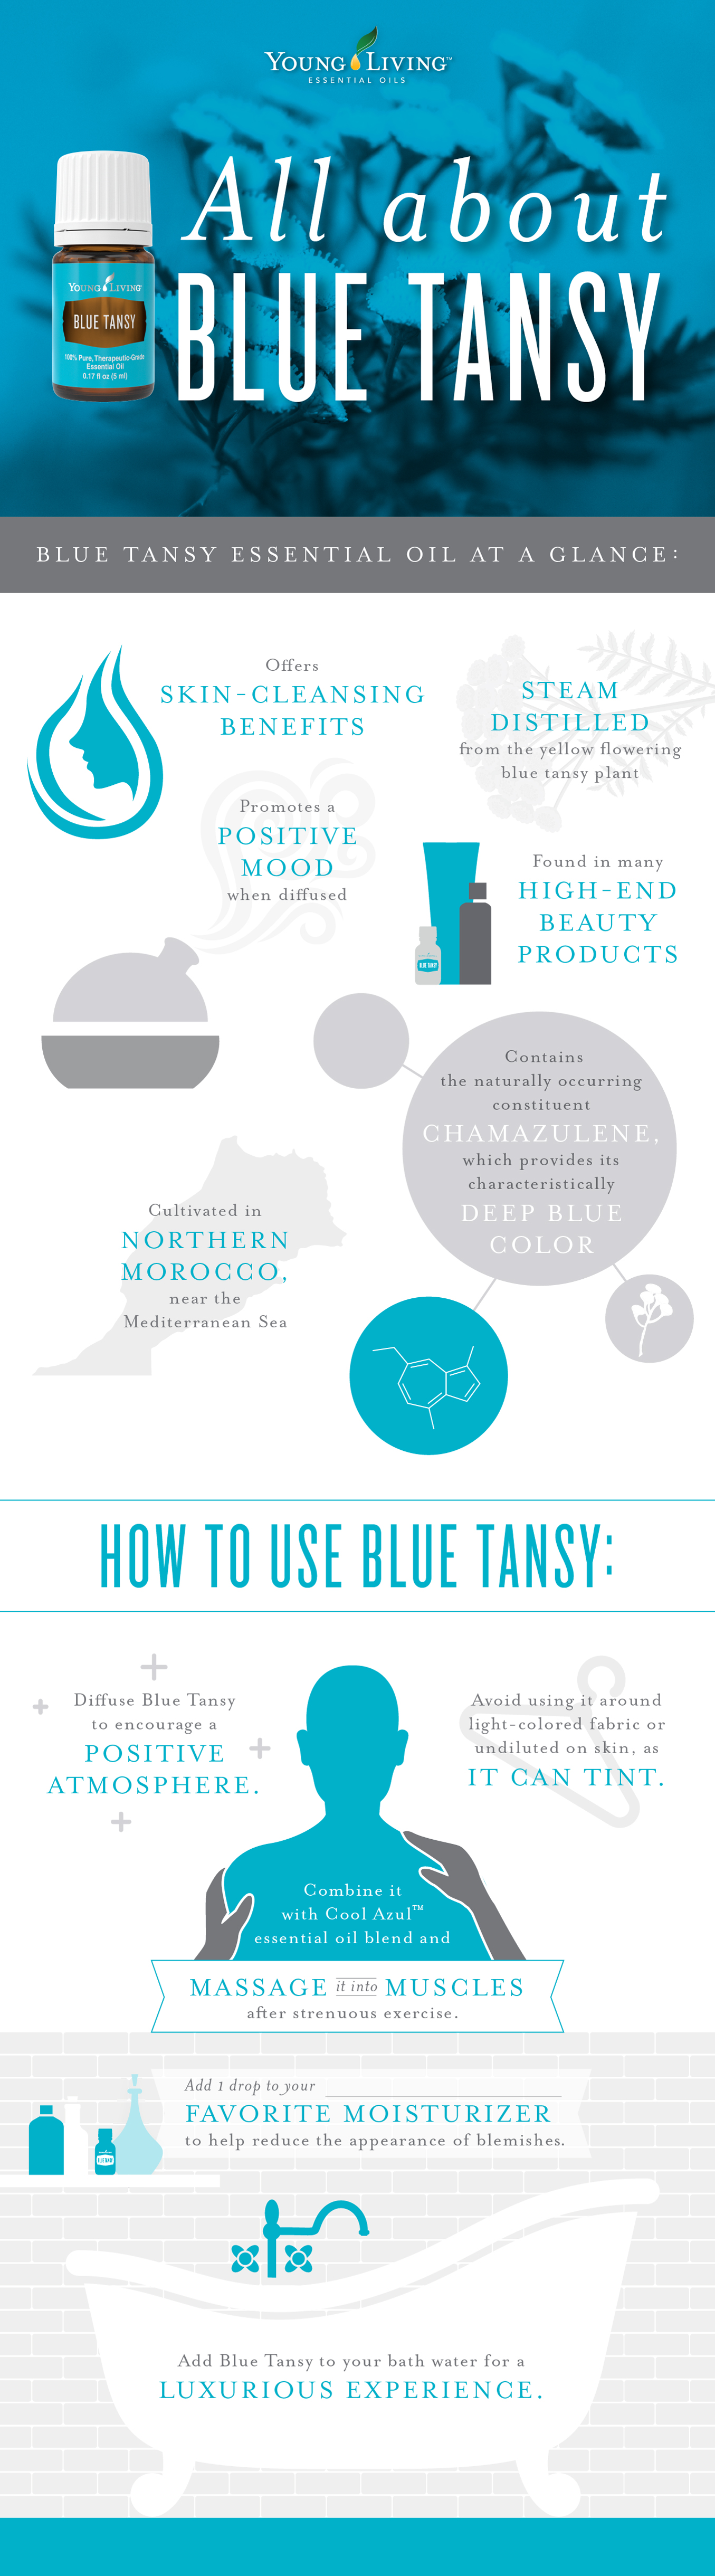 Blue Tansy essential oil benefits and uses